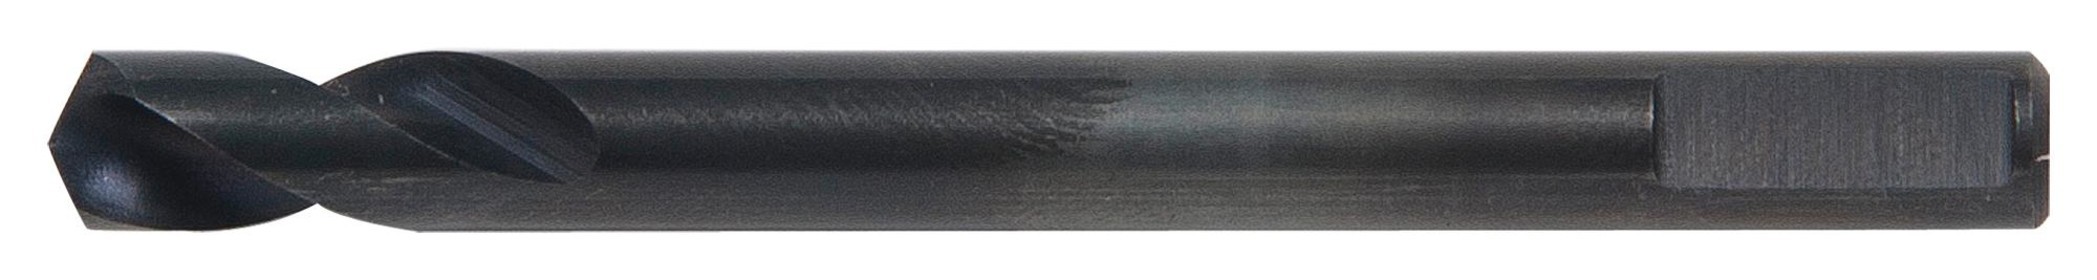 Greenlee 645-001 Replacement Pilot Drill, 2